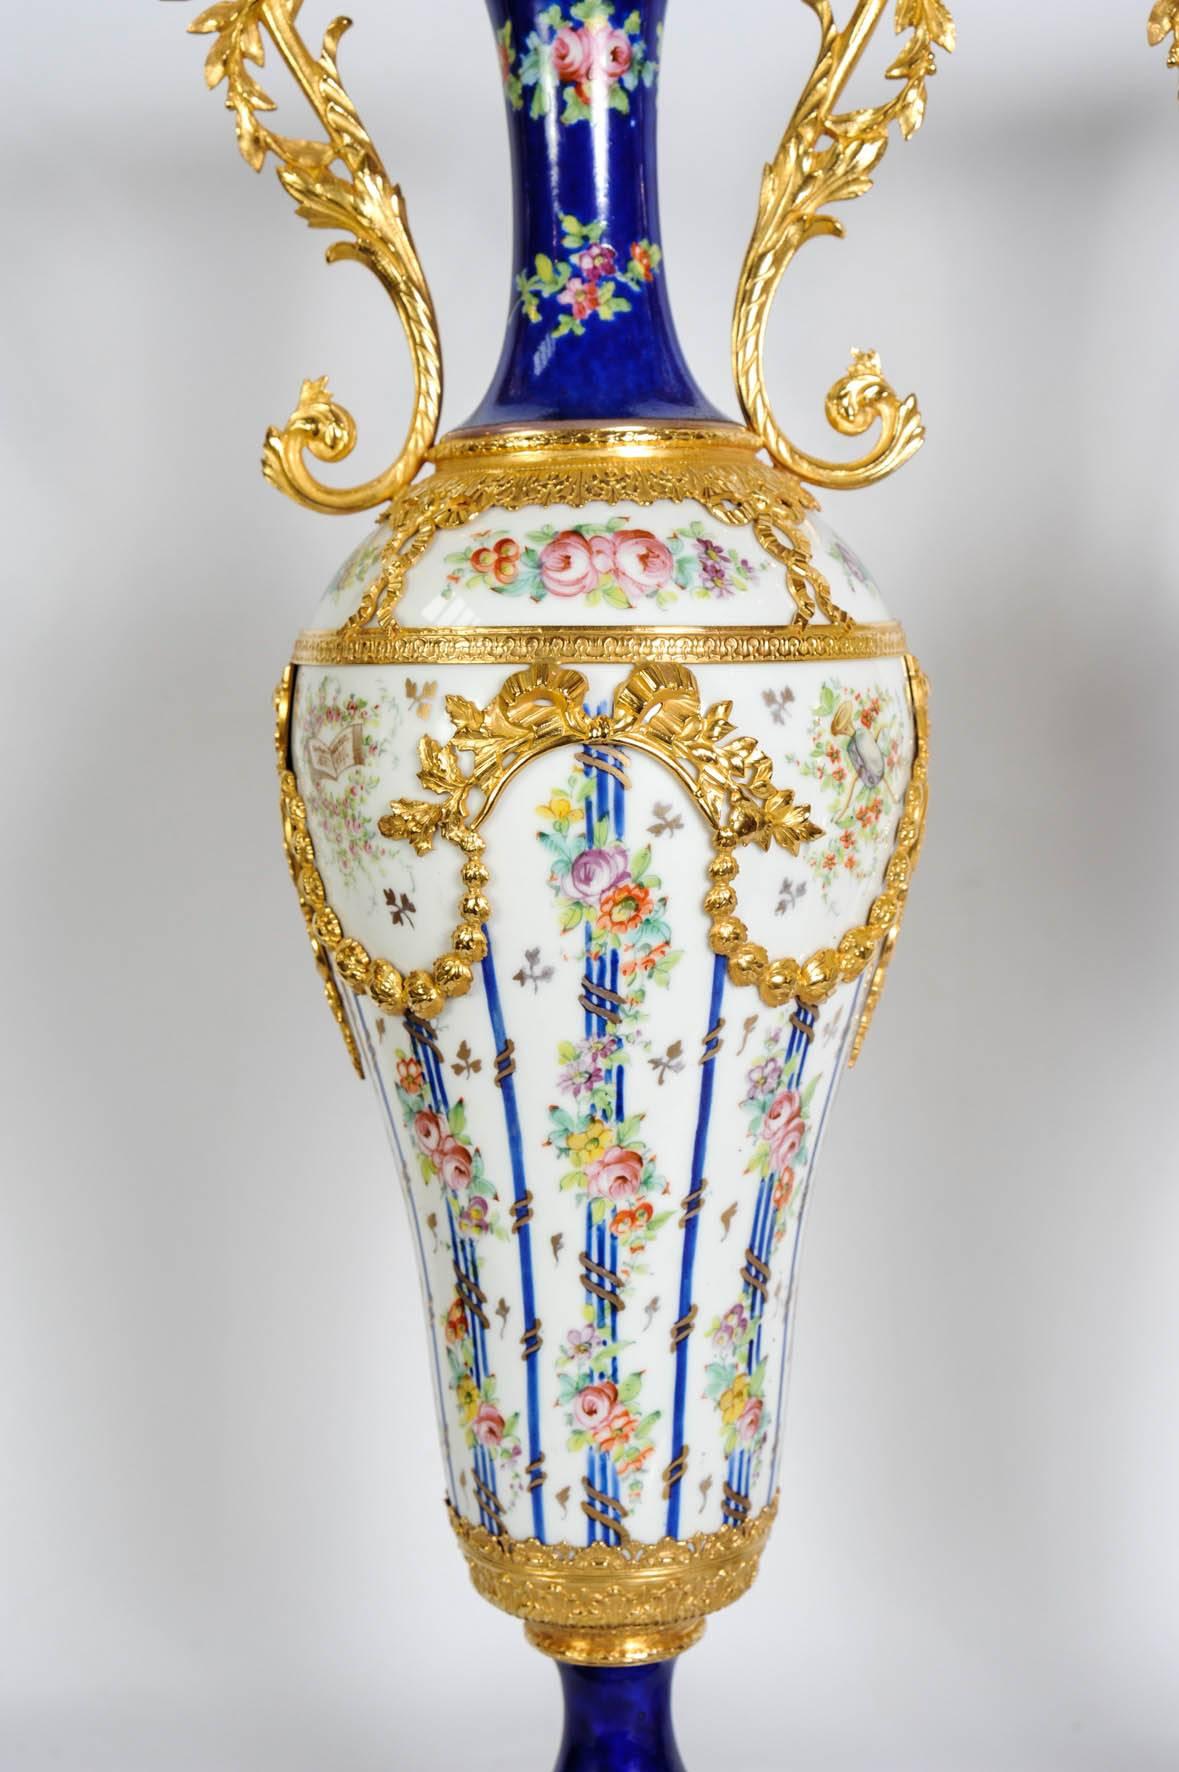 Elegant pair of vases, Porcelain of Sèvres ornamented with gilded bronzes.